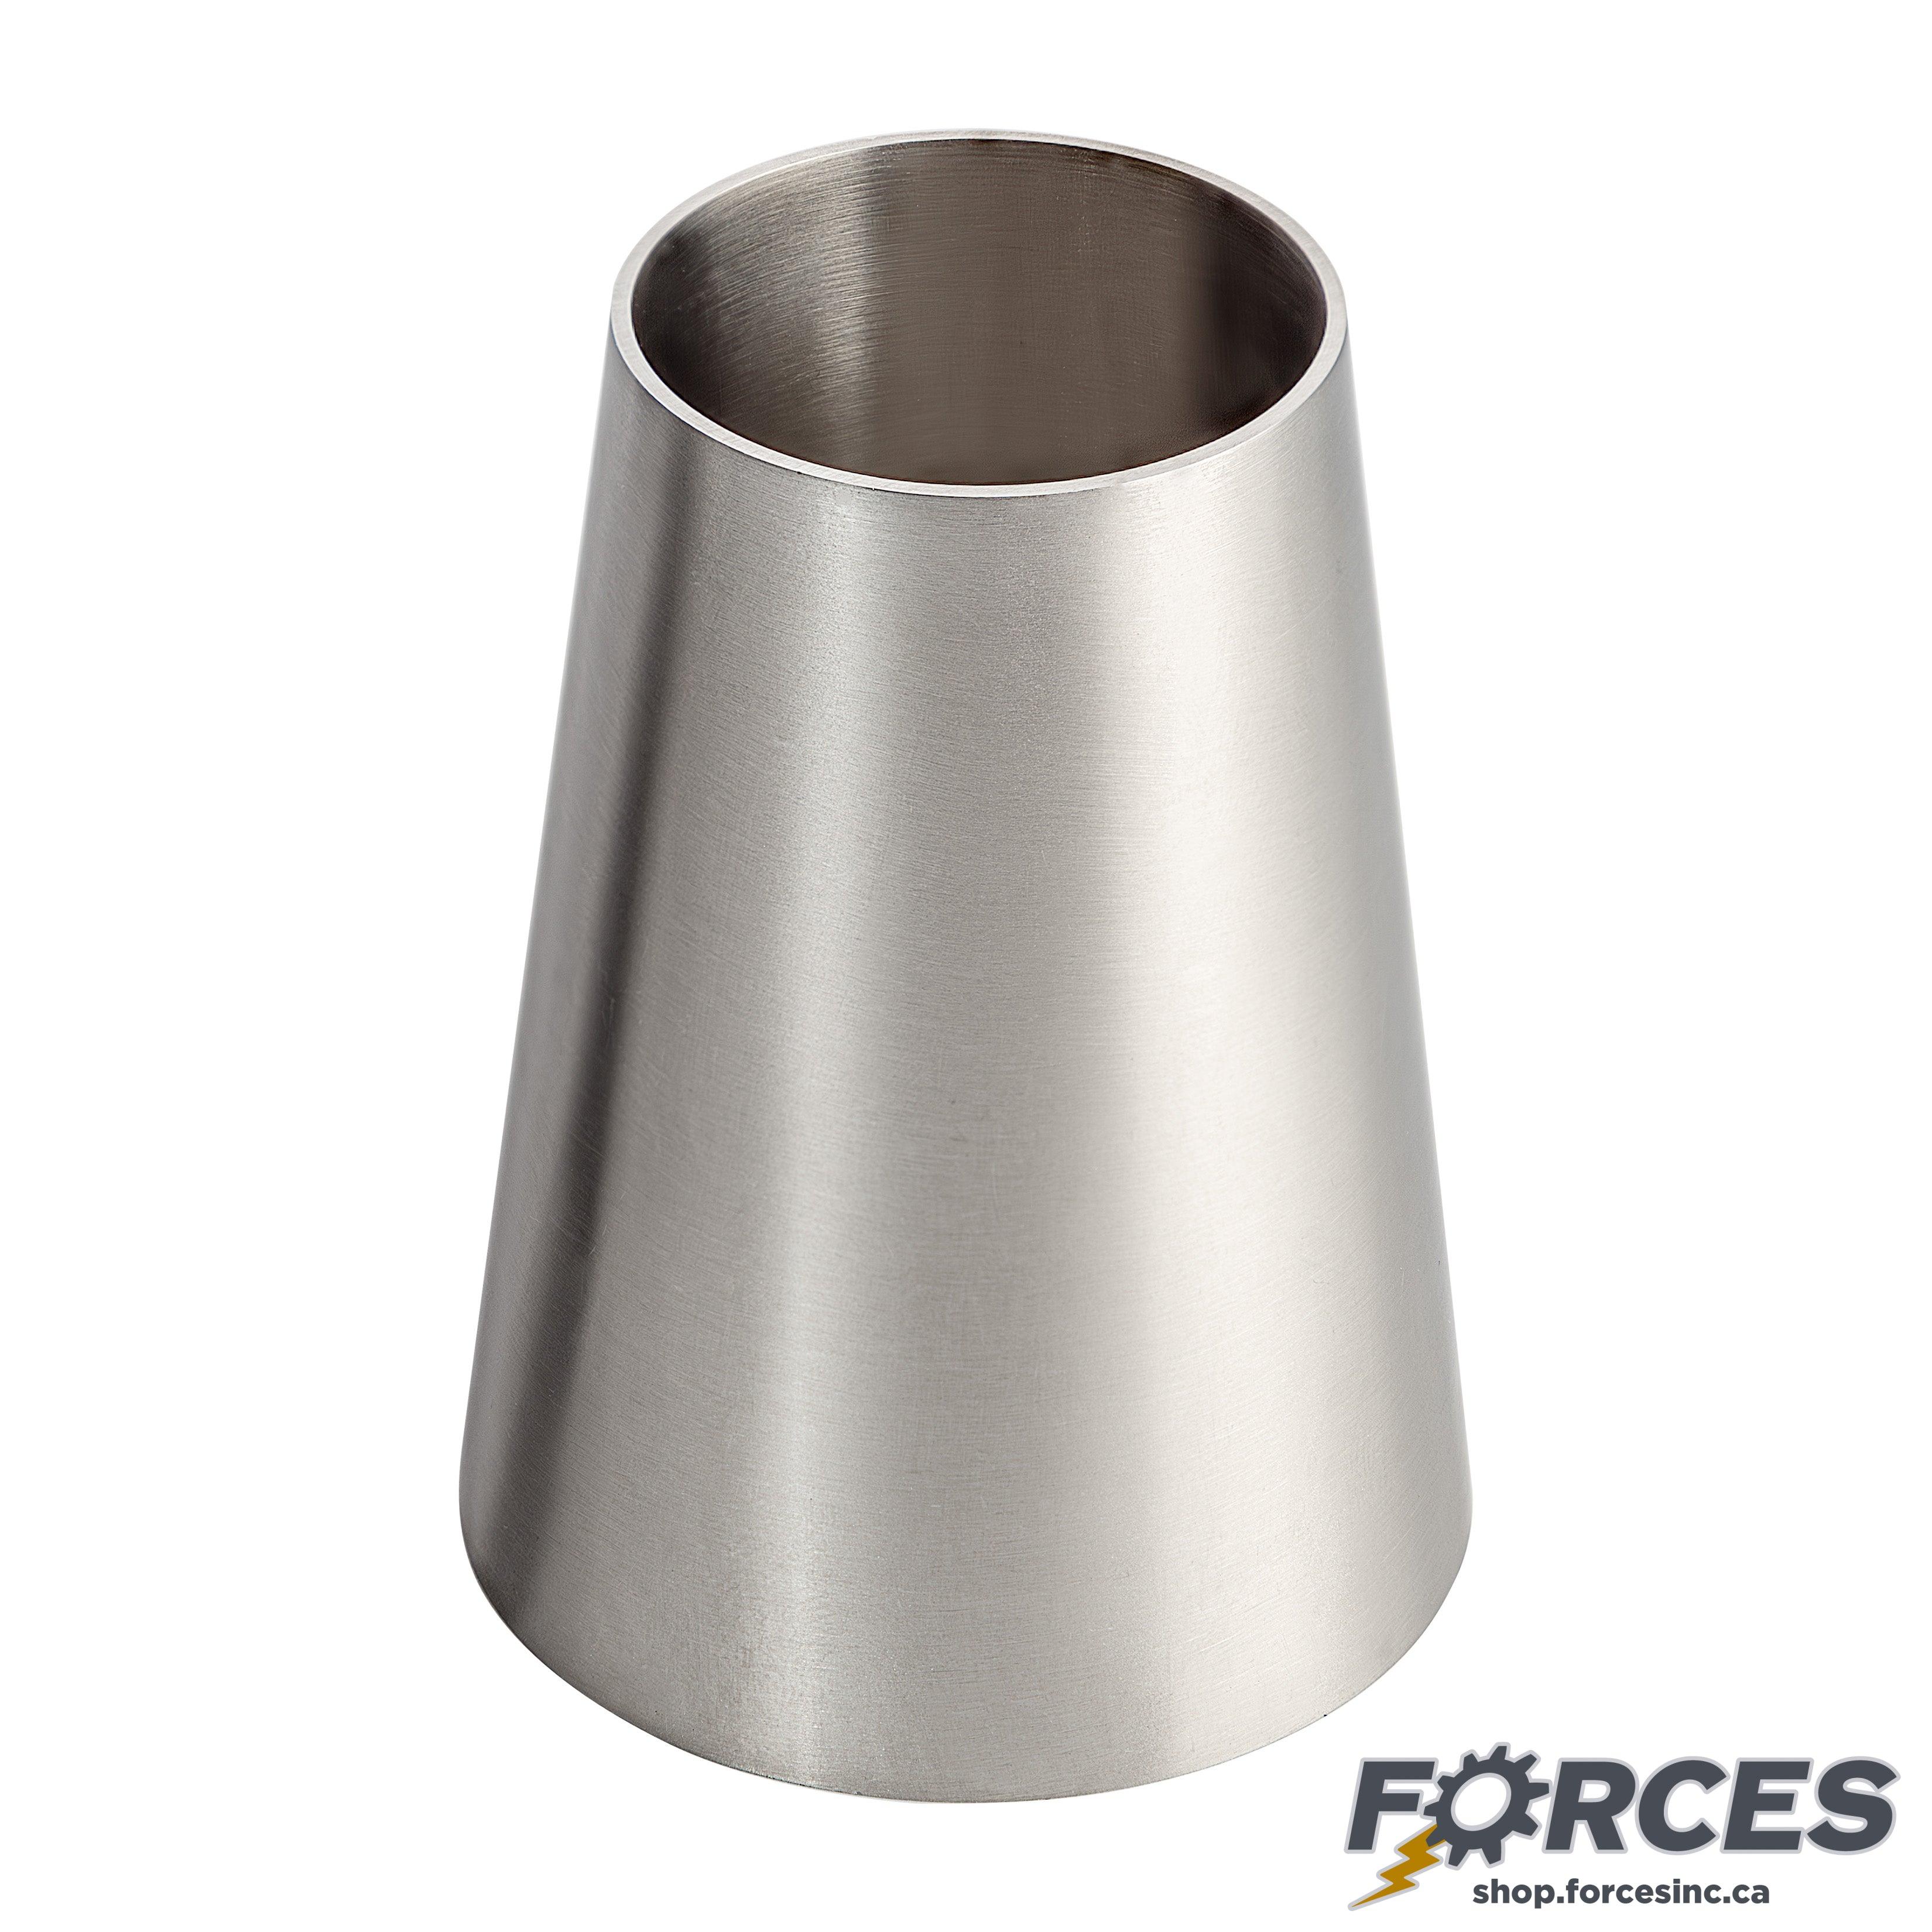 2" x 1-1/2" Butt Weld Concentric Reducer - Stainless Steel 304 - Forces Inc